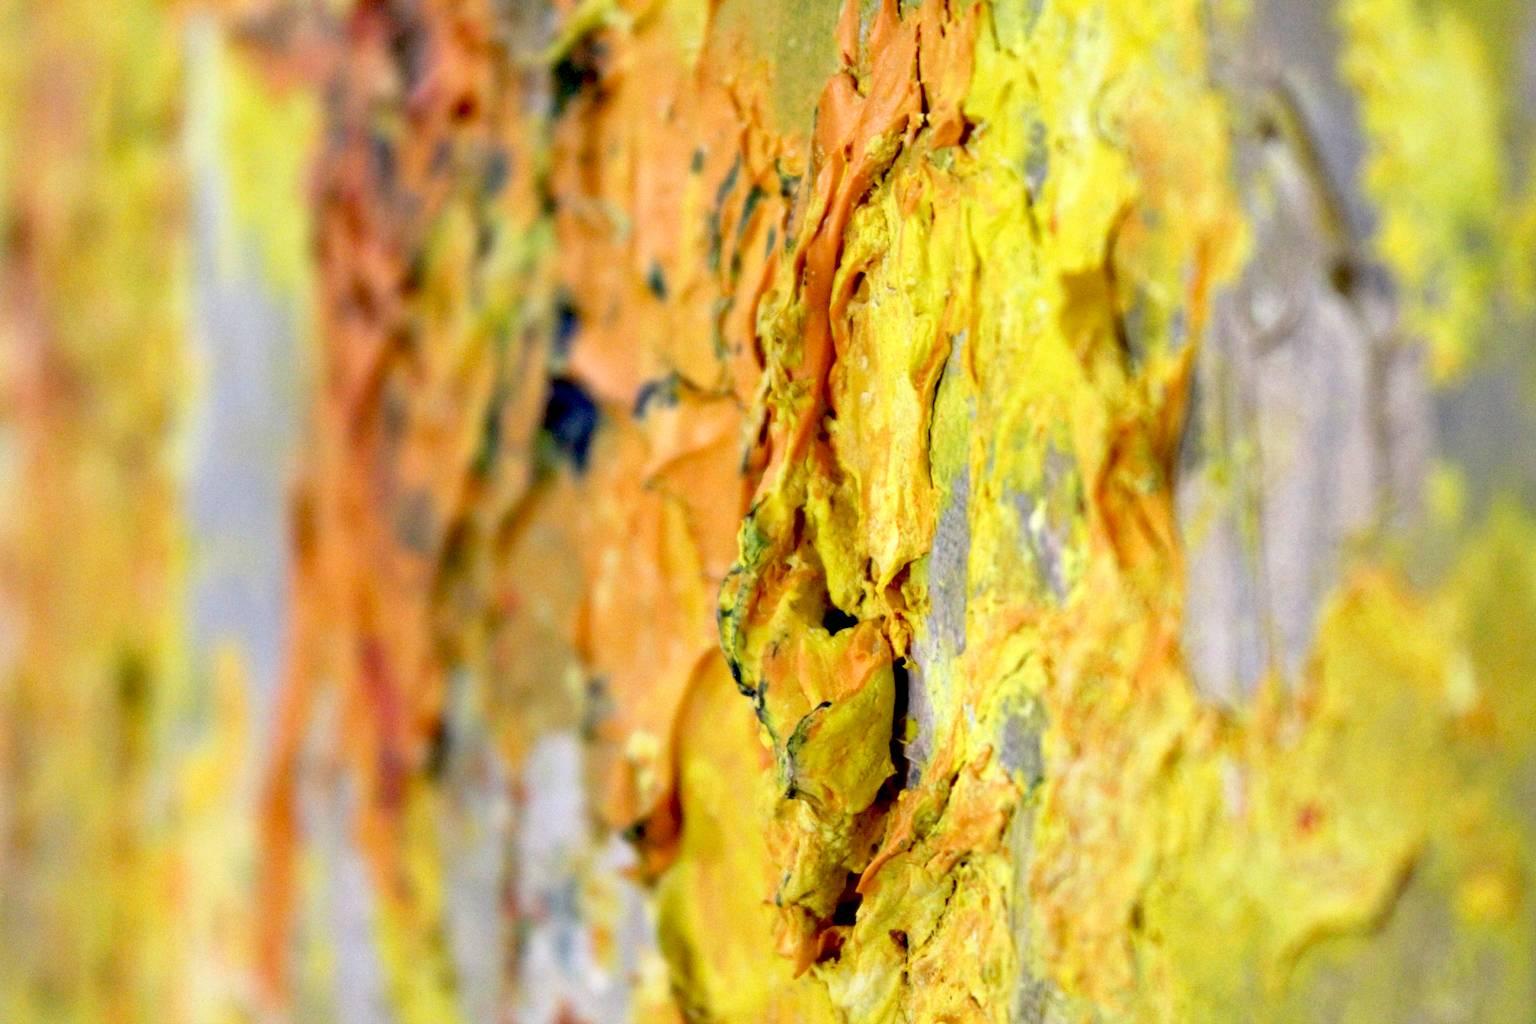 #32, Large yellow abstract painting, Dutch contemporary, Harry van Gestel 2